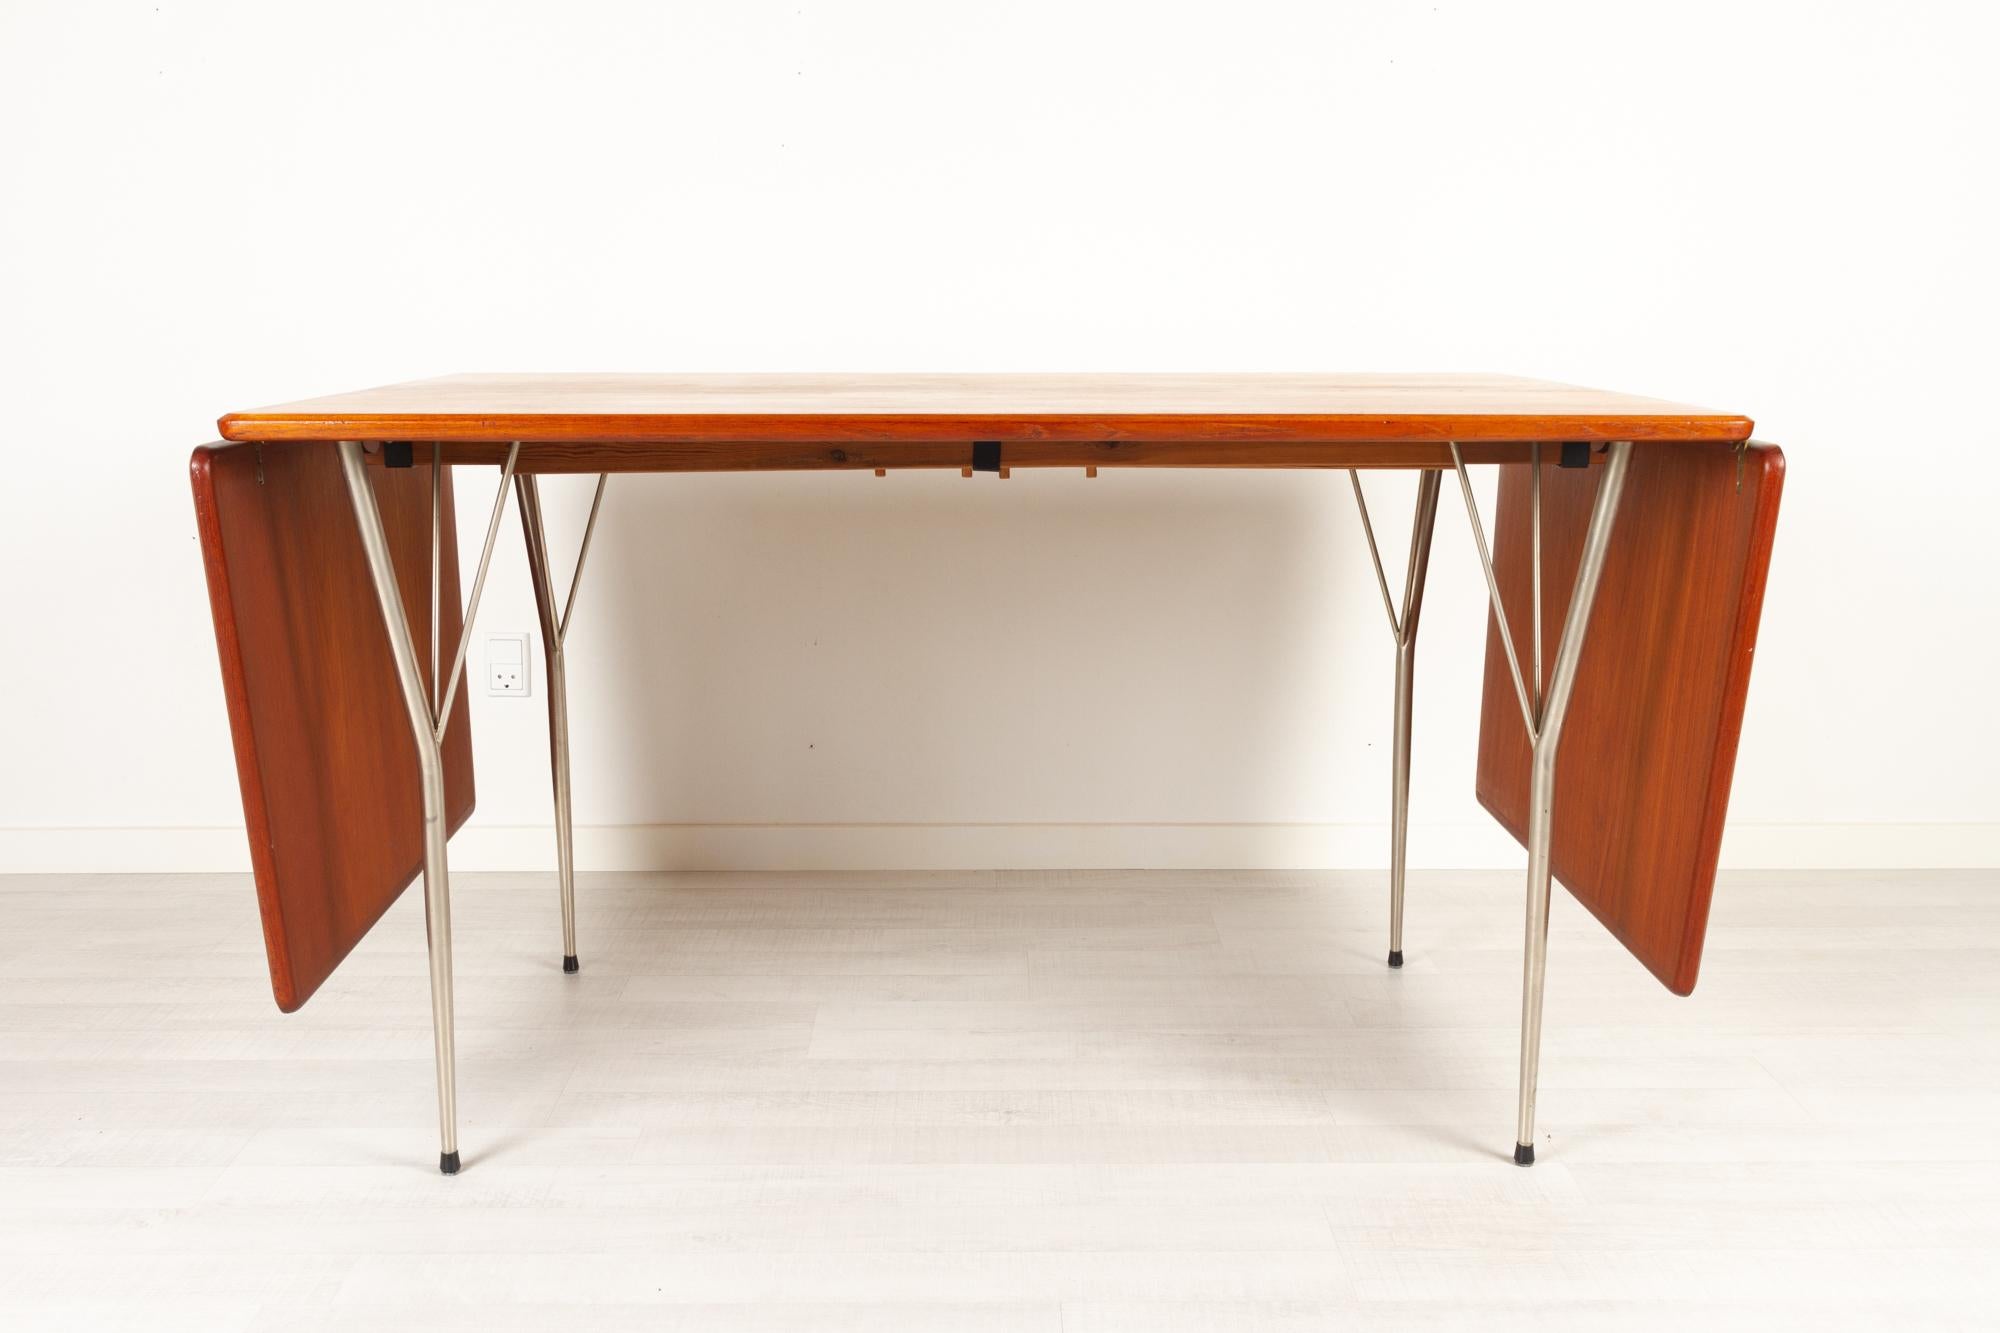 Vintage Danish teak drop leaf dining table 1950s
Beautiful and very elegant Mid-Century Modern dining table with two drop leaves. This design is very much in the style of Børge Mogensen. 
Table top and leaves in teak veneer with edges in solid